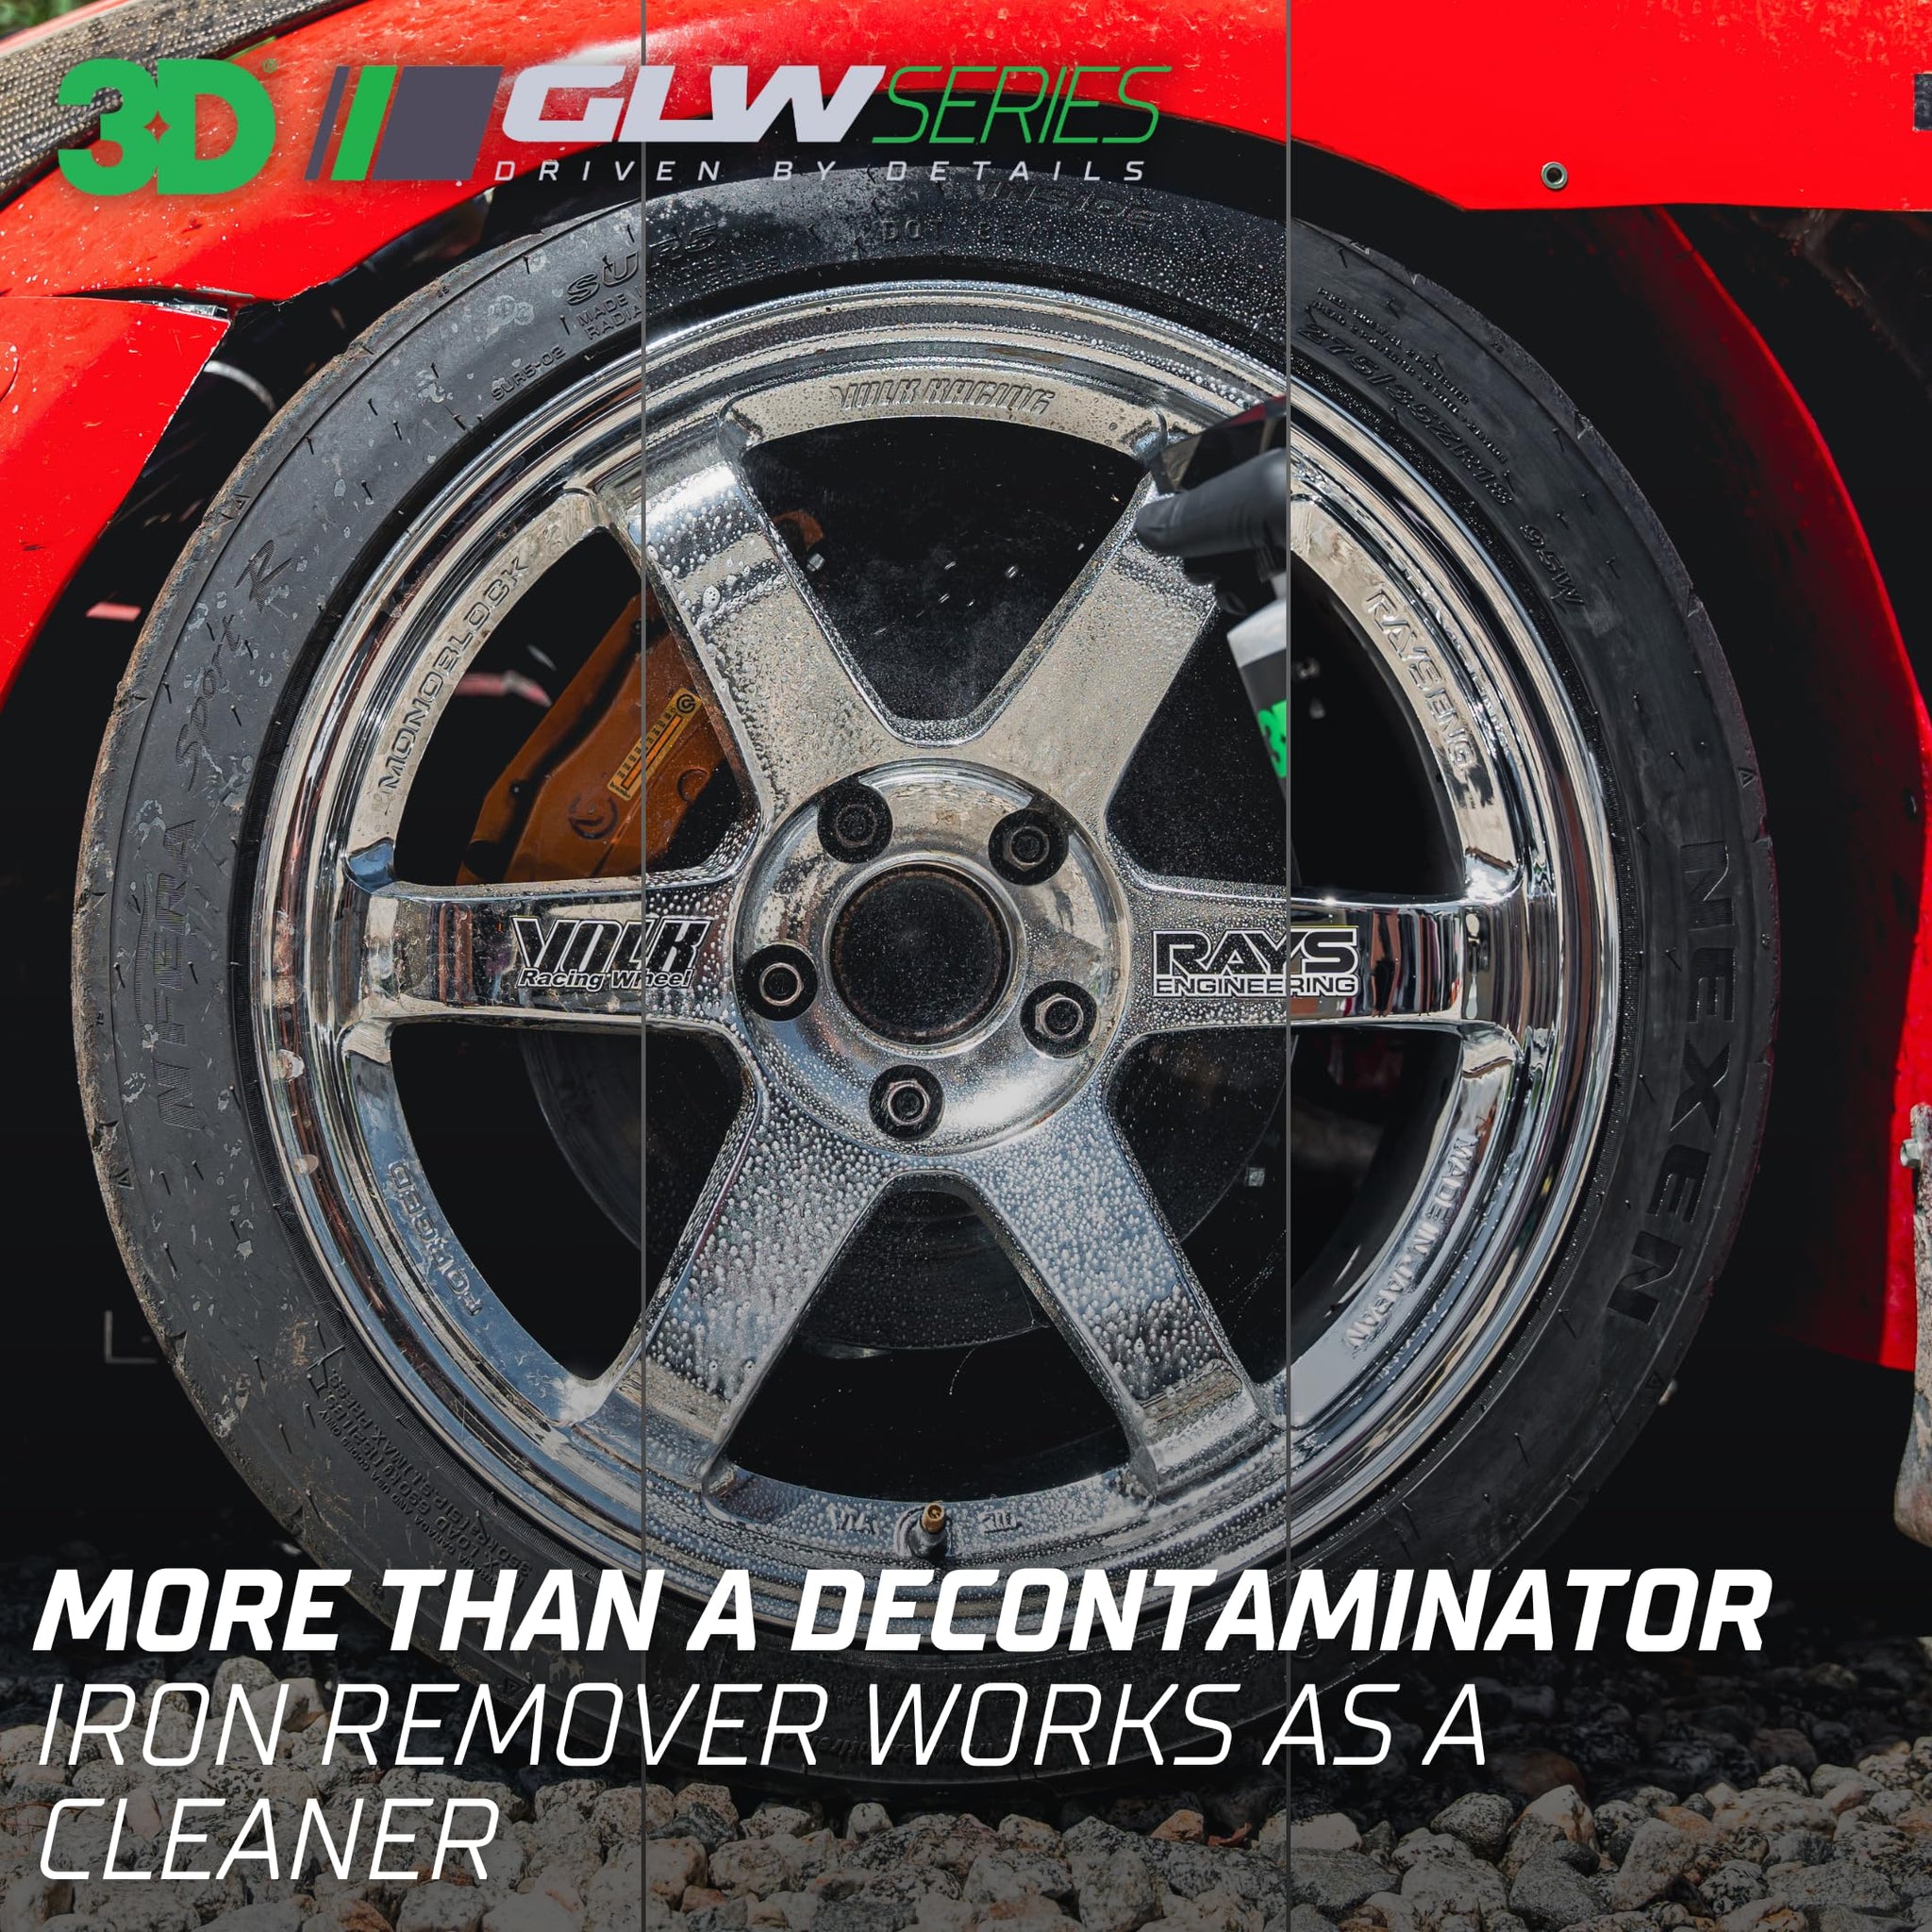 3D Iron Remover GLW Series, DIY Car Detailing